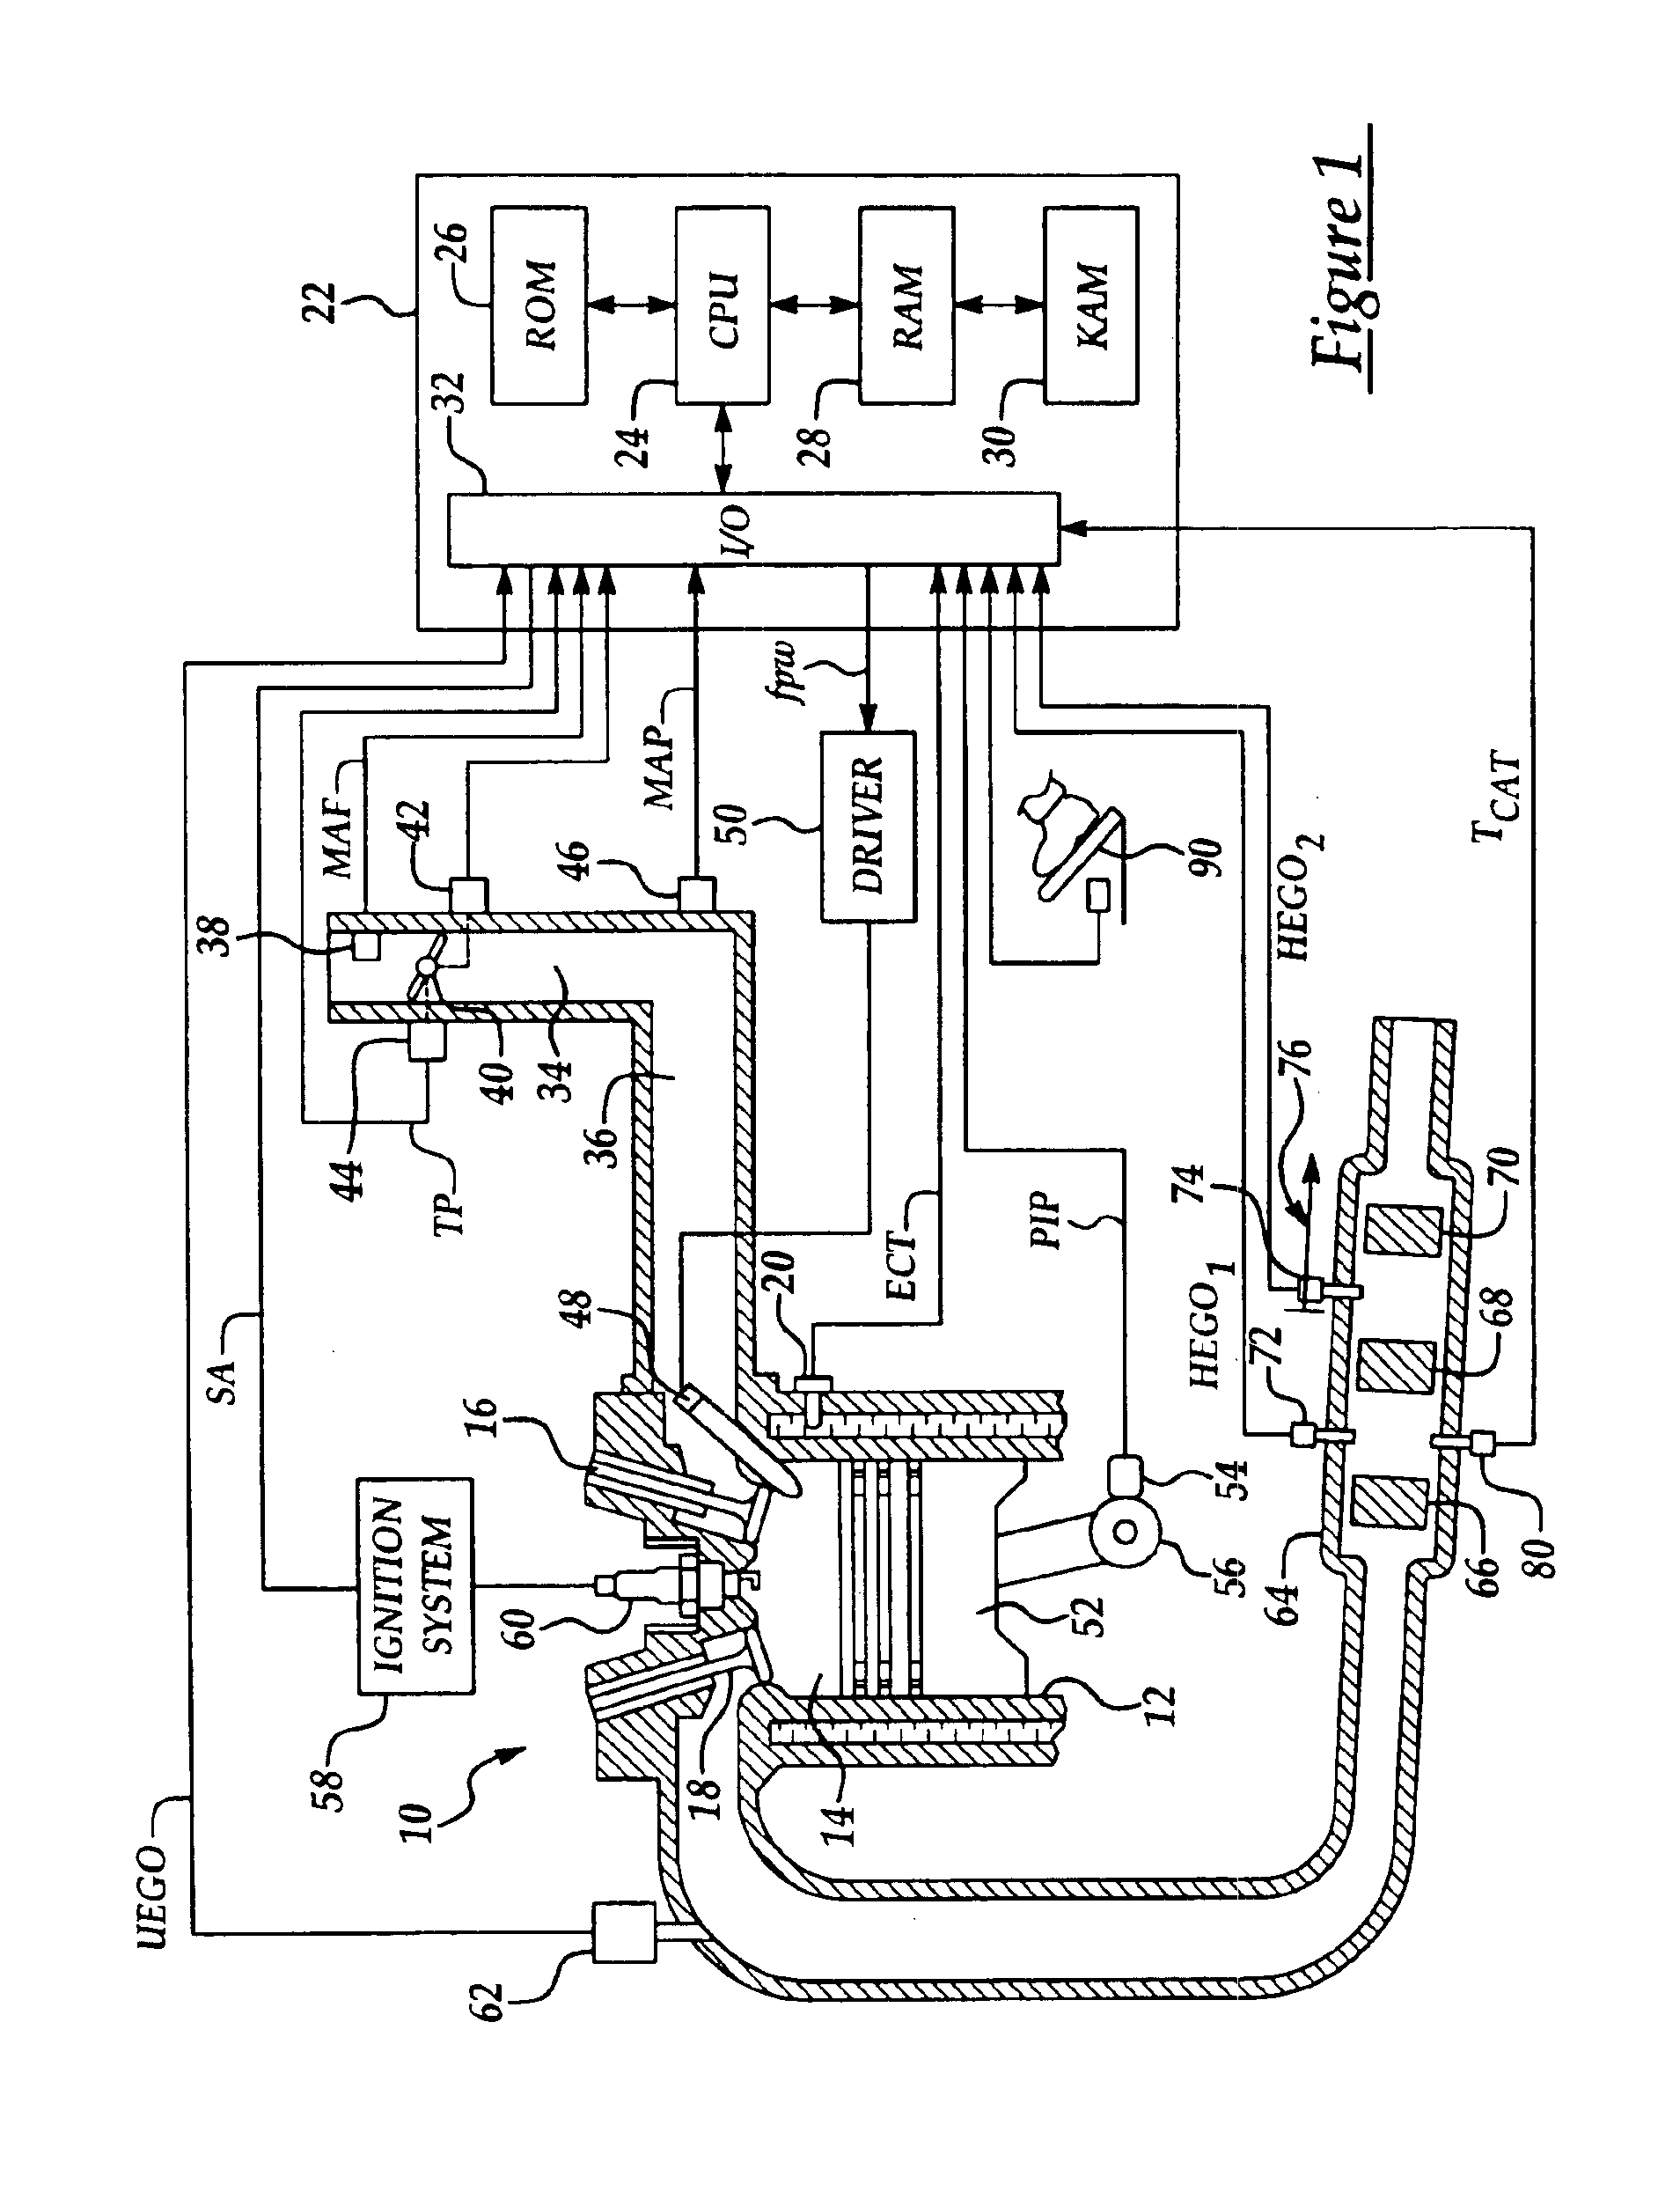 Engine control and catalyst monitoring based on estimated catalyst gain